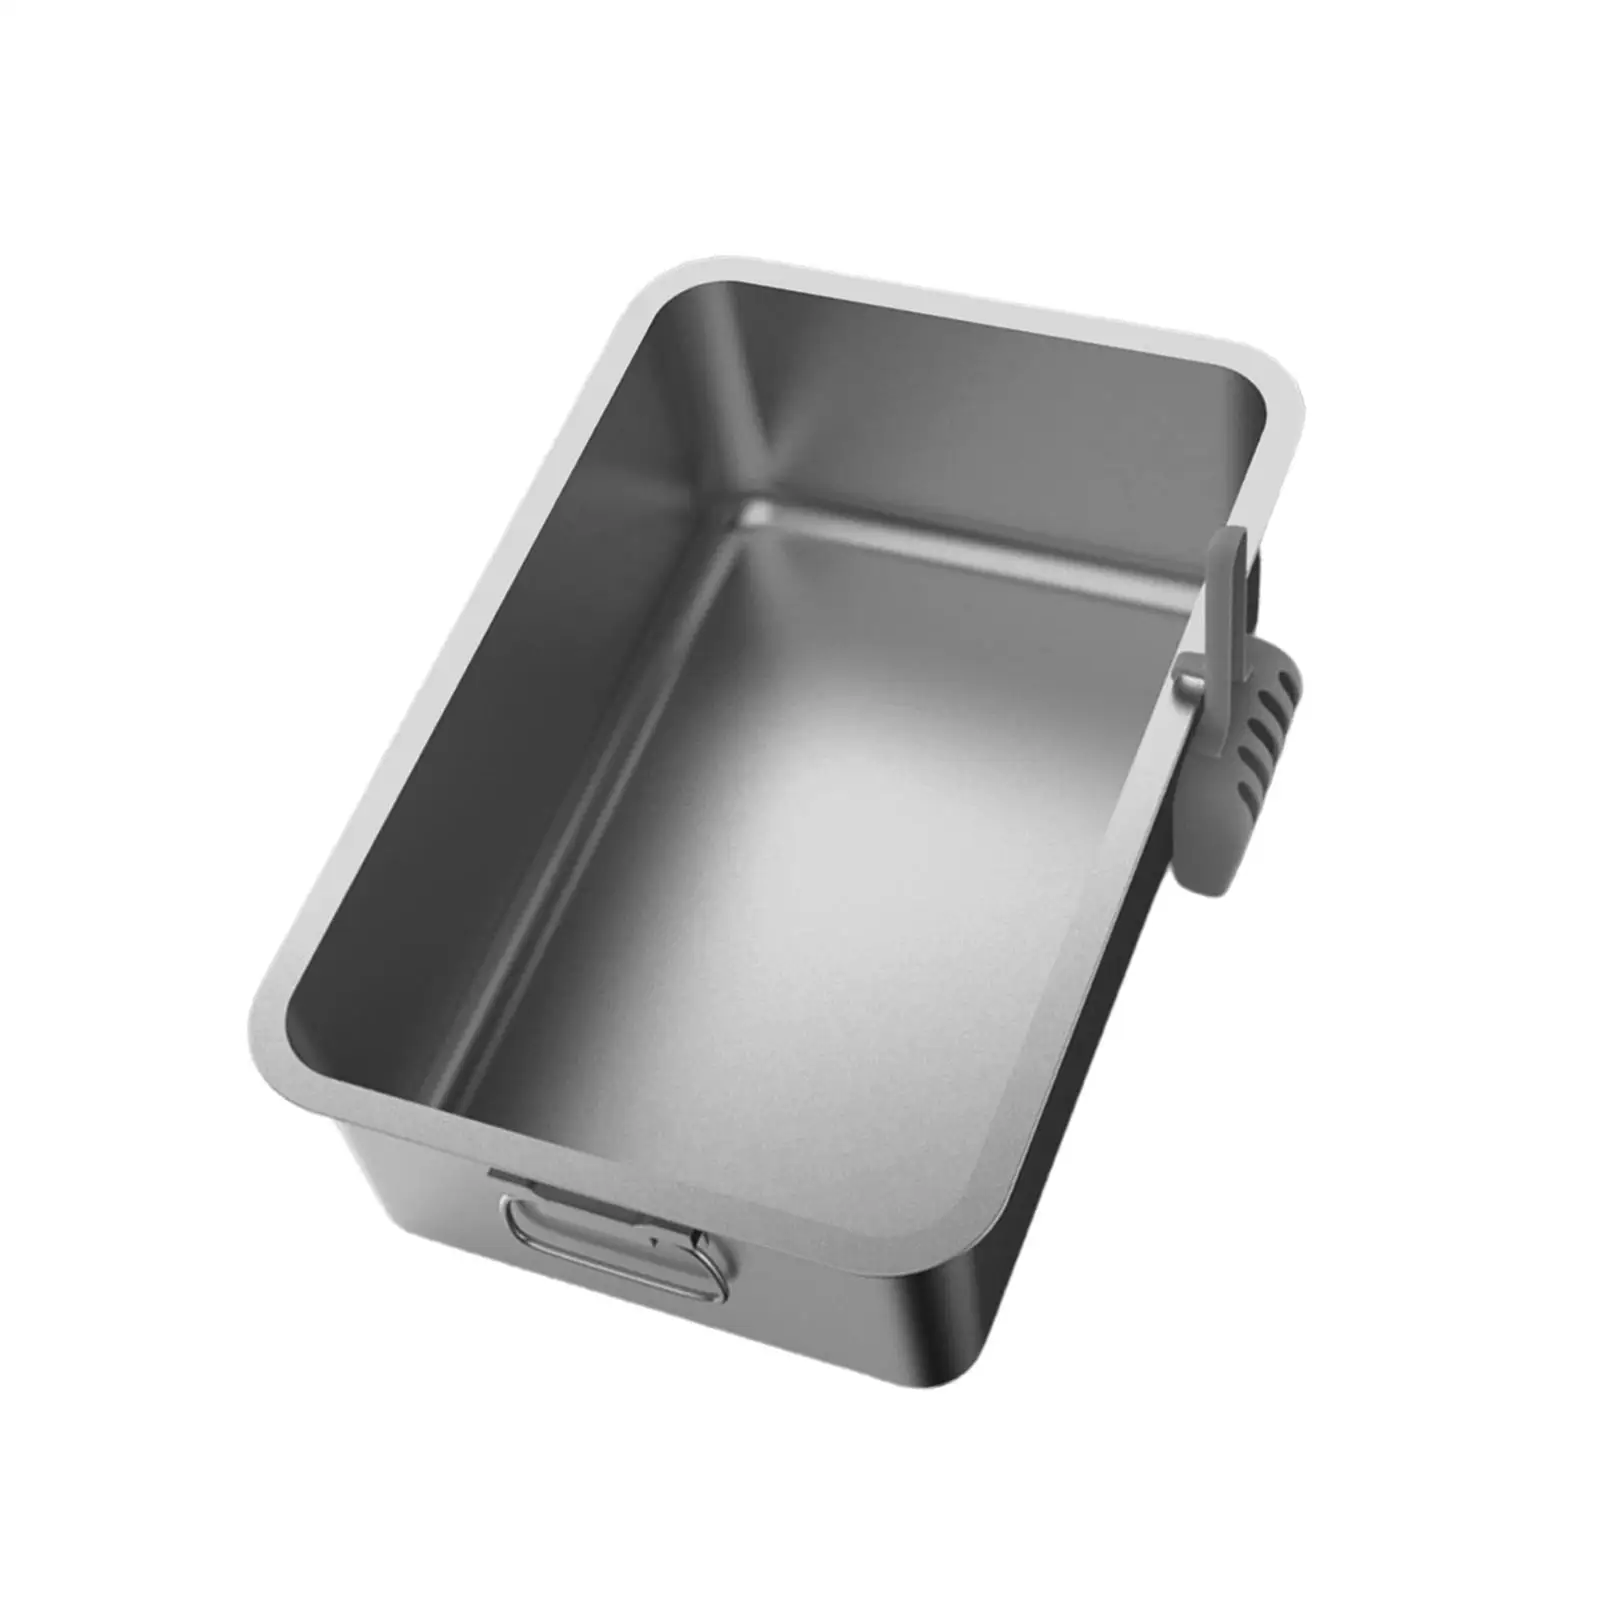 Rabbit Cat Litter Container Holder Stainless Steel Rust Free with Side Carrying Handle Sturdy Durable Smooth Surface